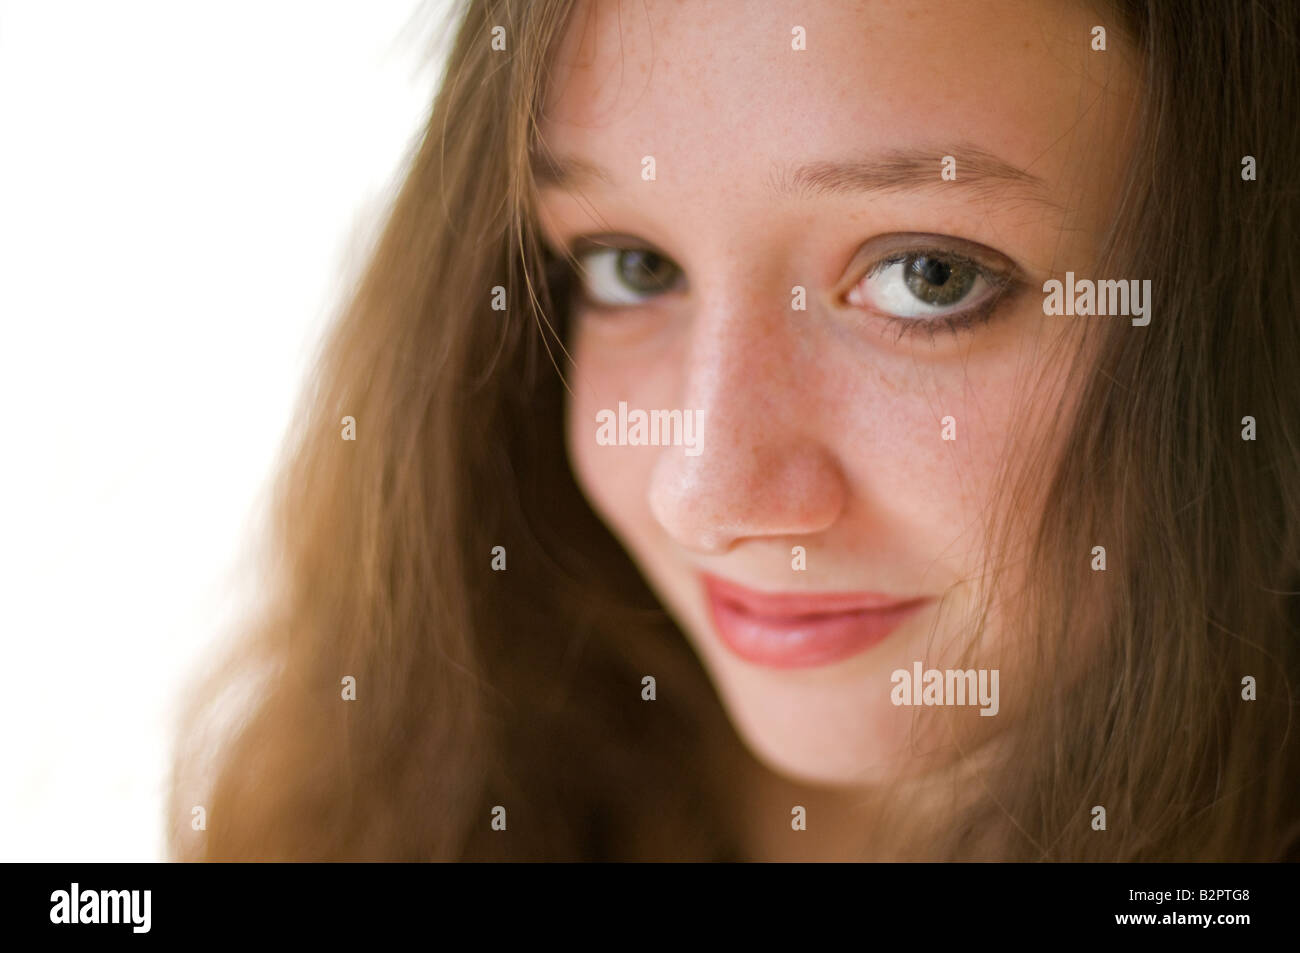 An attractive chestnut brown haired adolescent Caucasian girl Shot with minimum depth of field Focus is on the eye Stock Photo